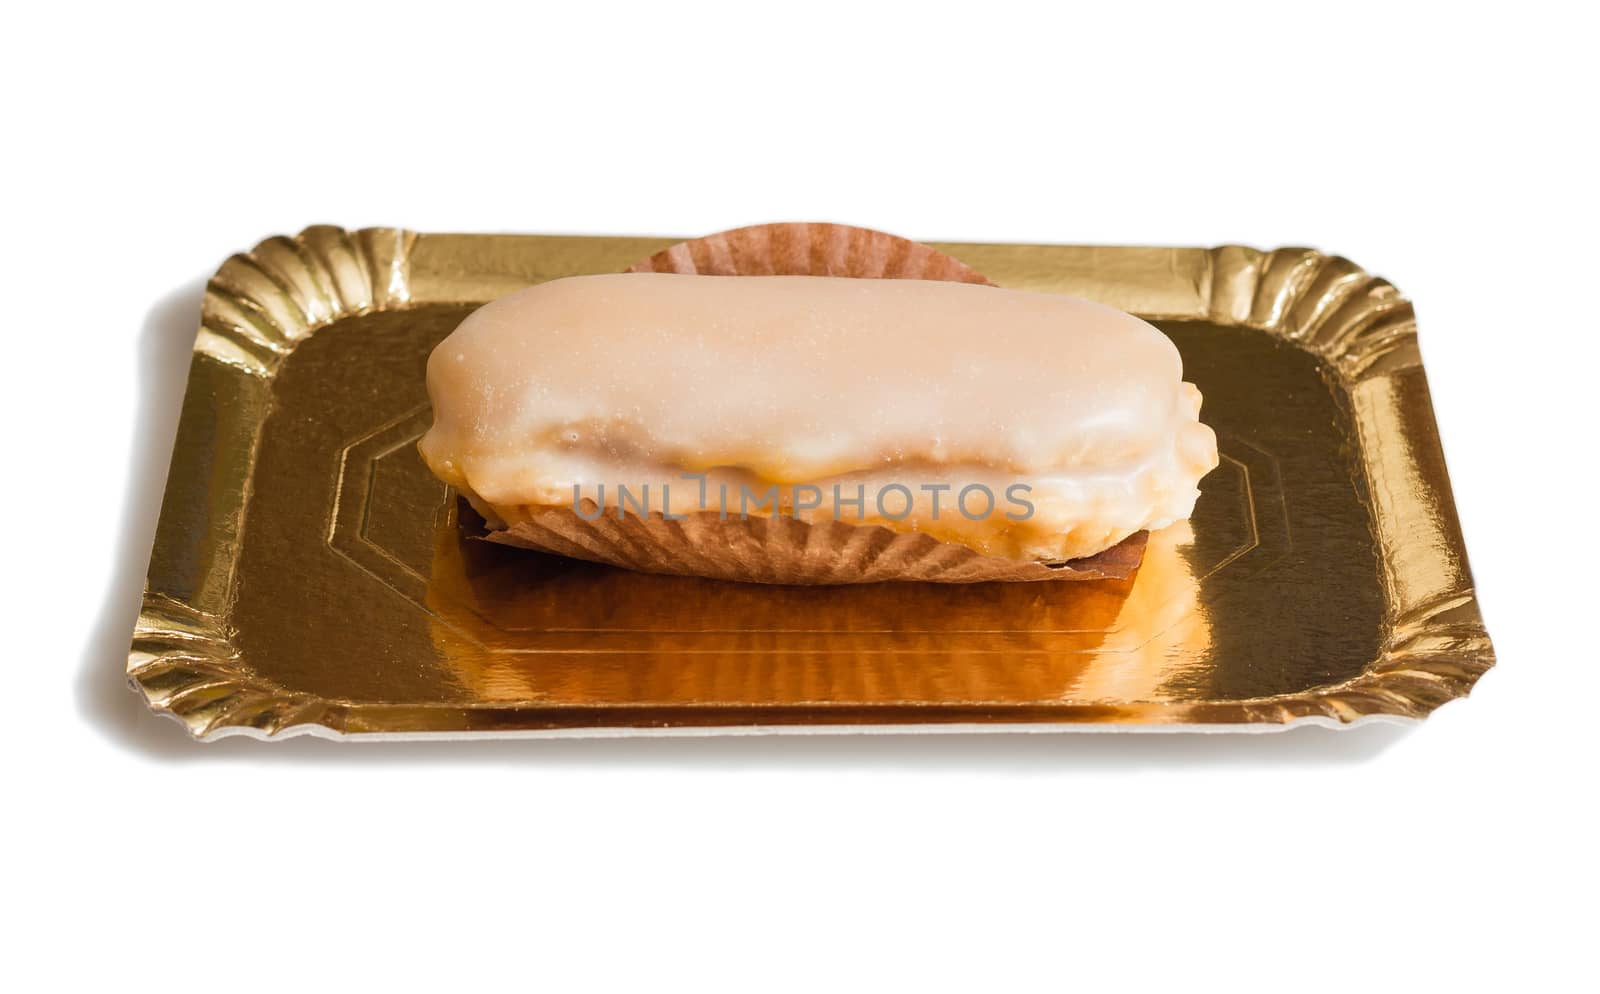 Traditional asturian almond cake with sugar frosting and known a by doble.d